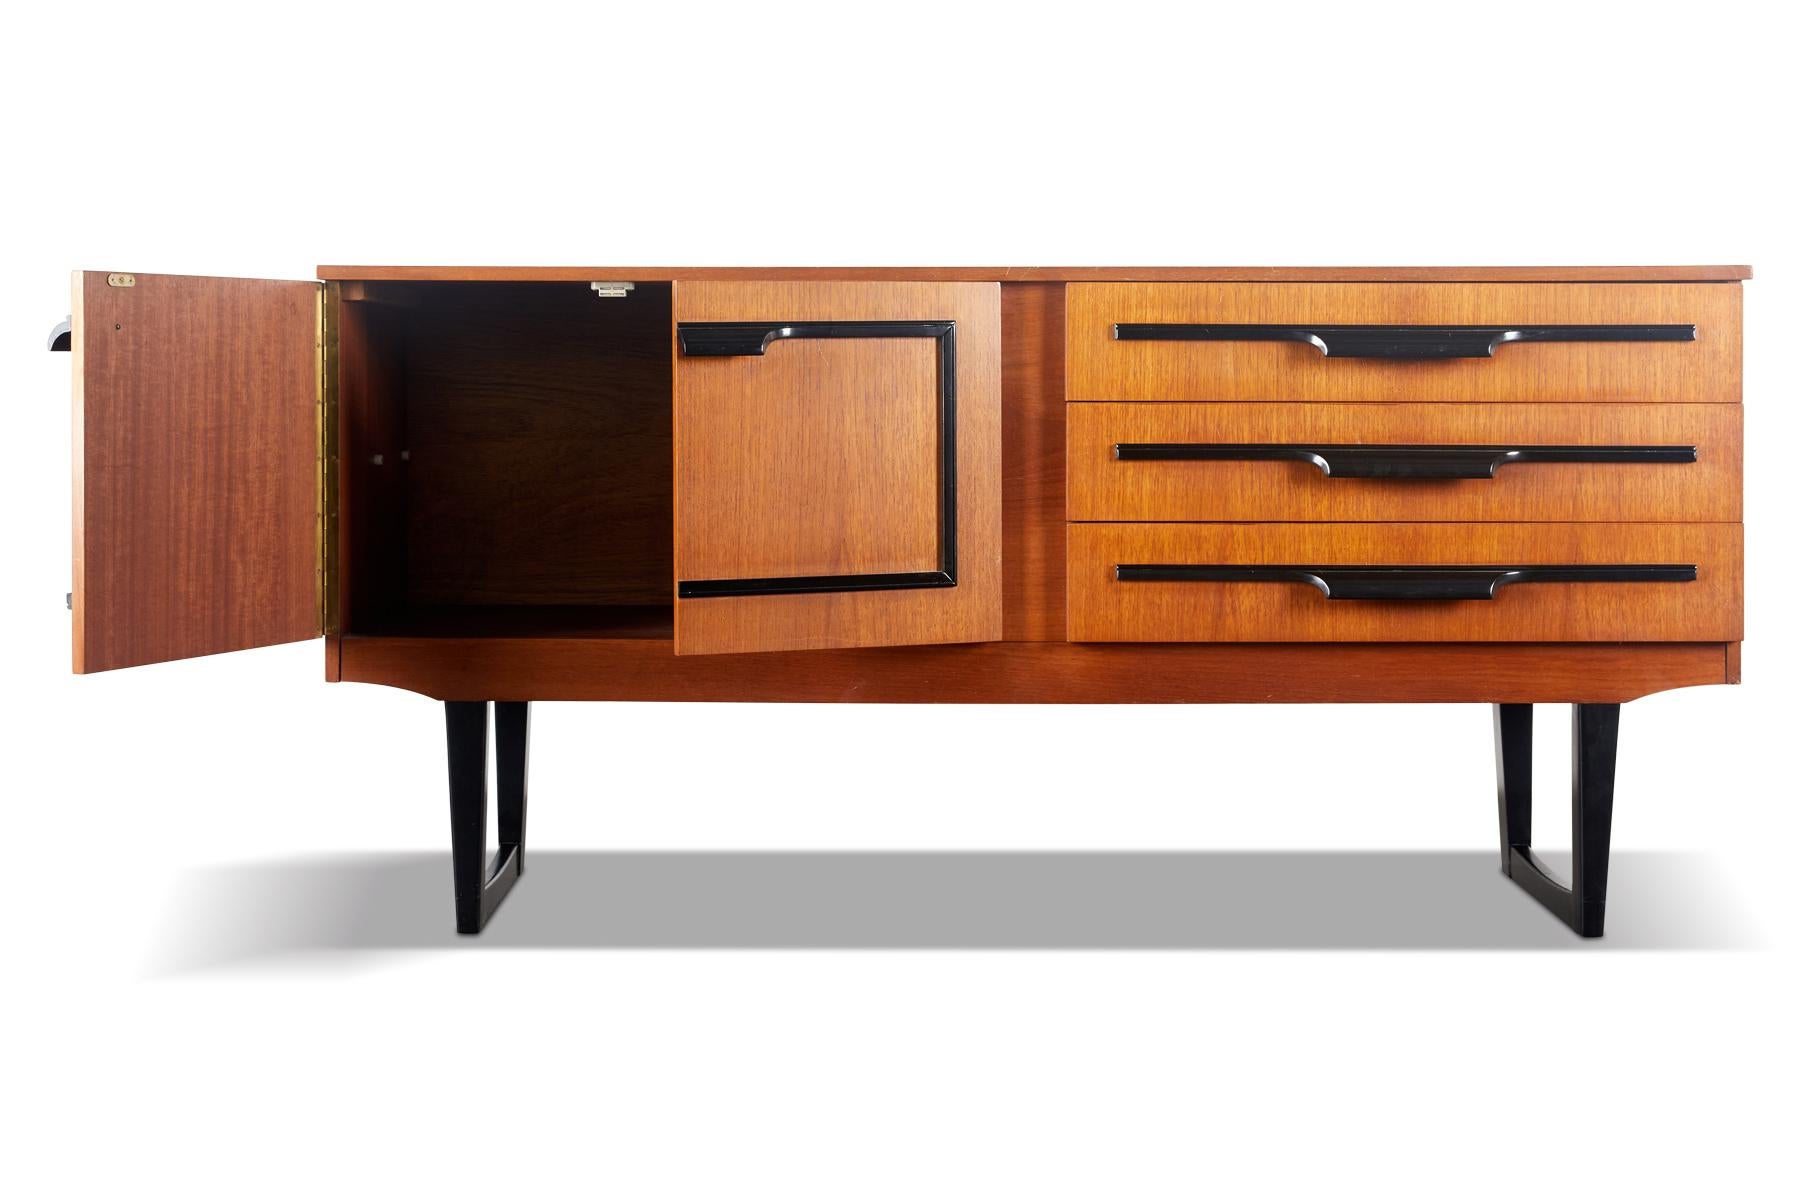 20th Century English Modern Midcentury Credenza in Teak with Black Lacquer Accents For Sale